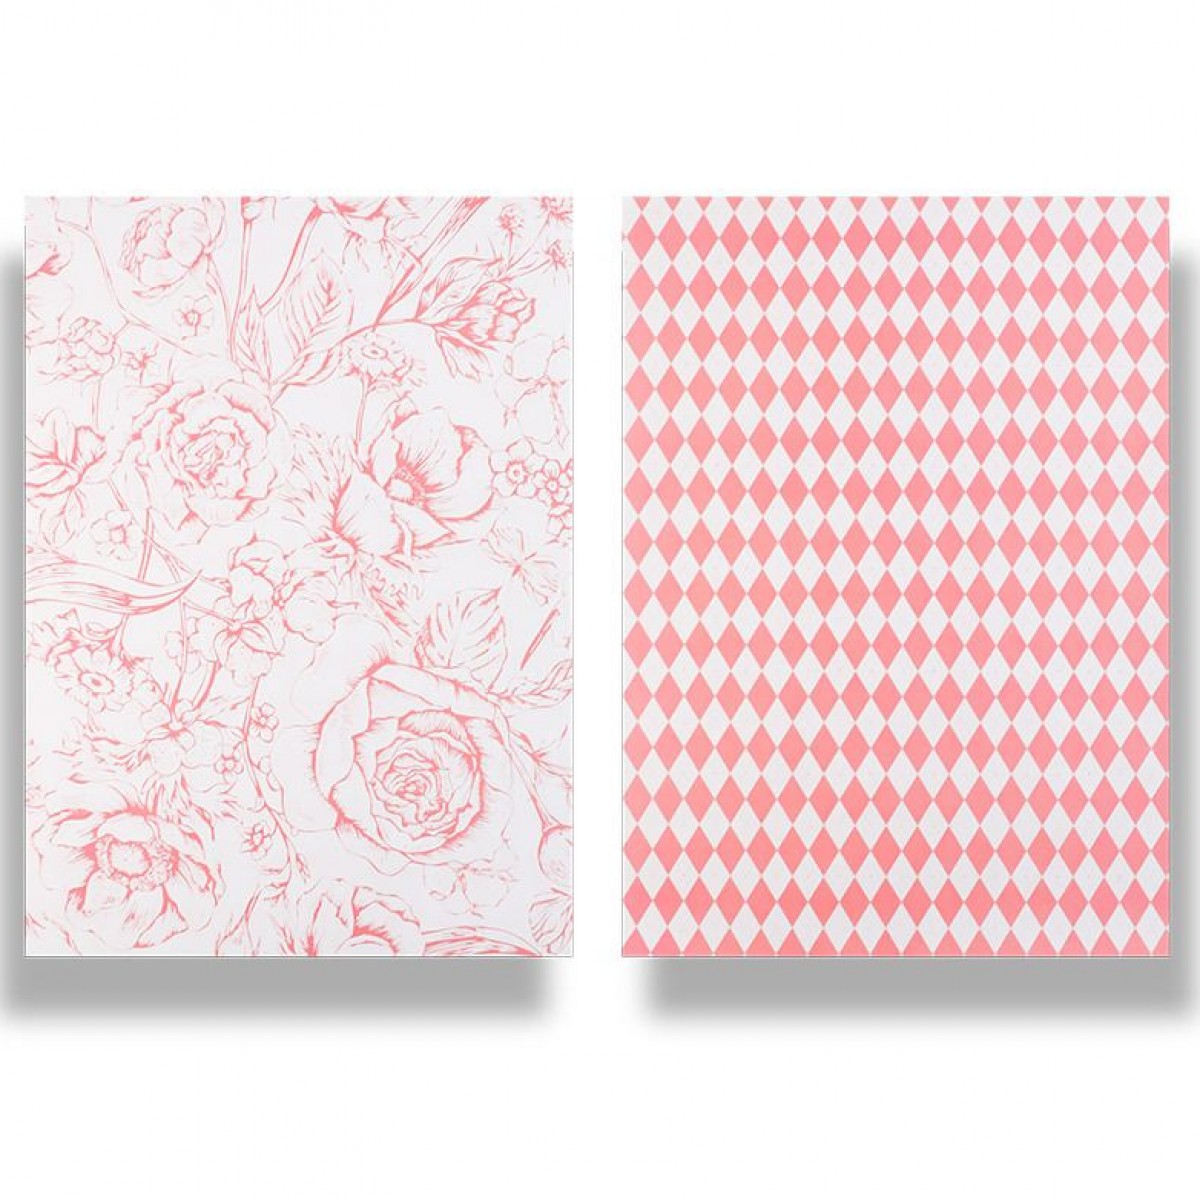 7836 Pink Floral & Chex DS Print 58x58cm (20 Sheets)